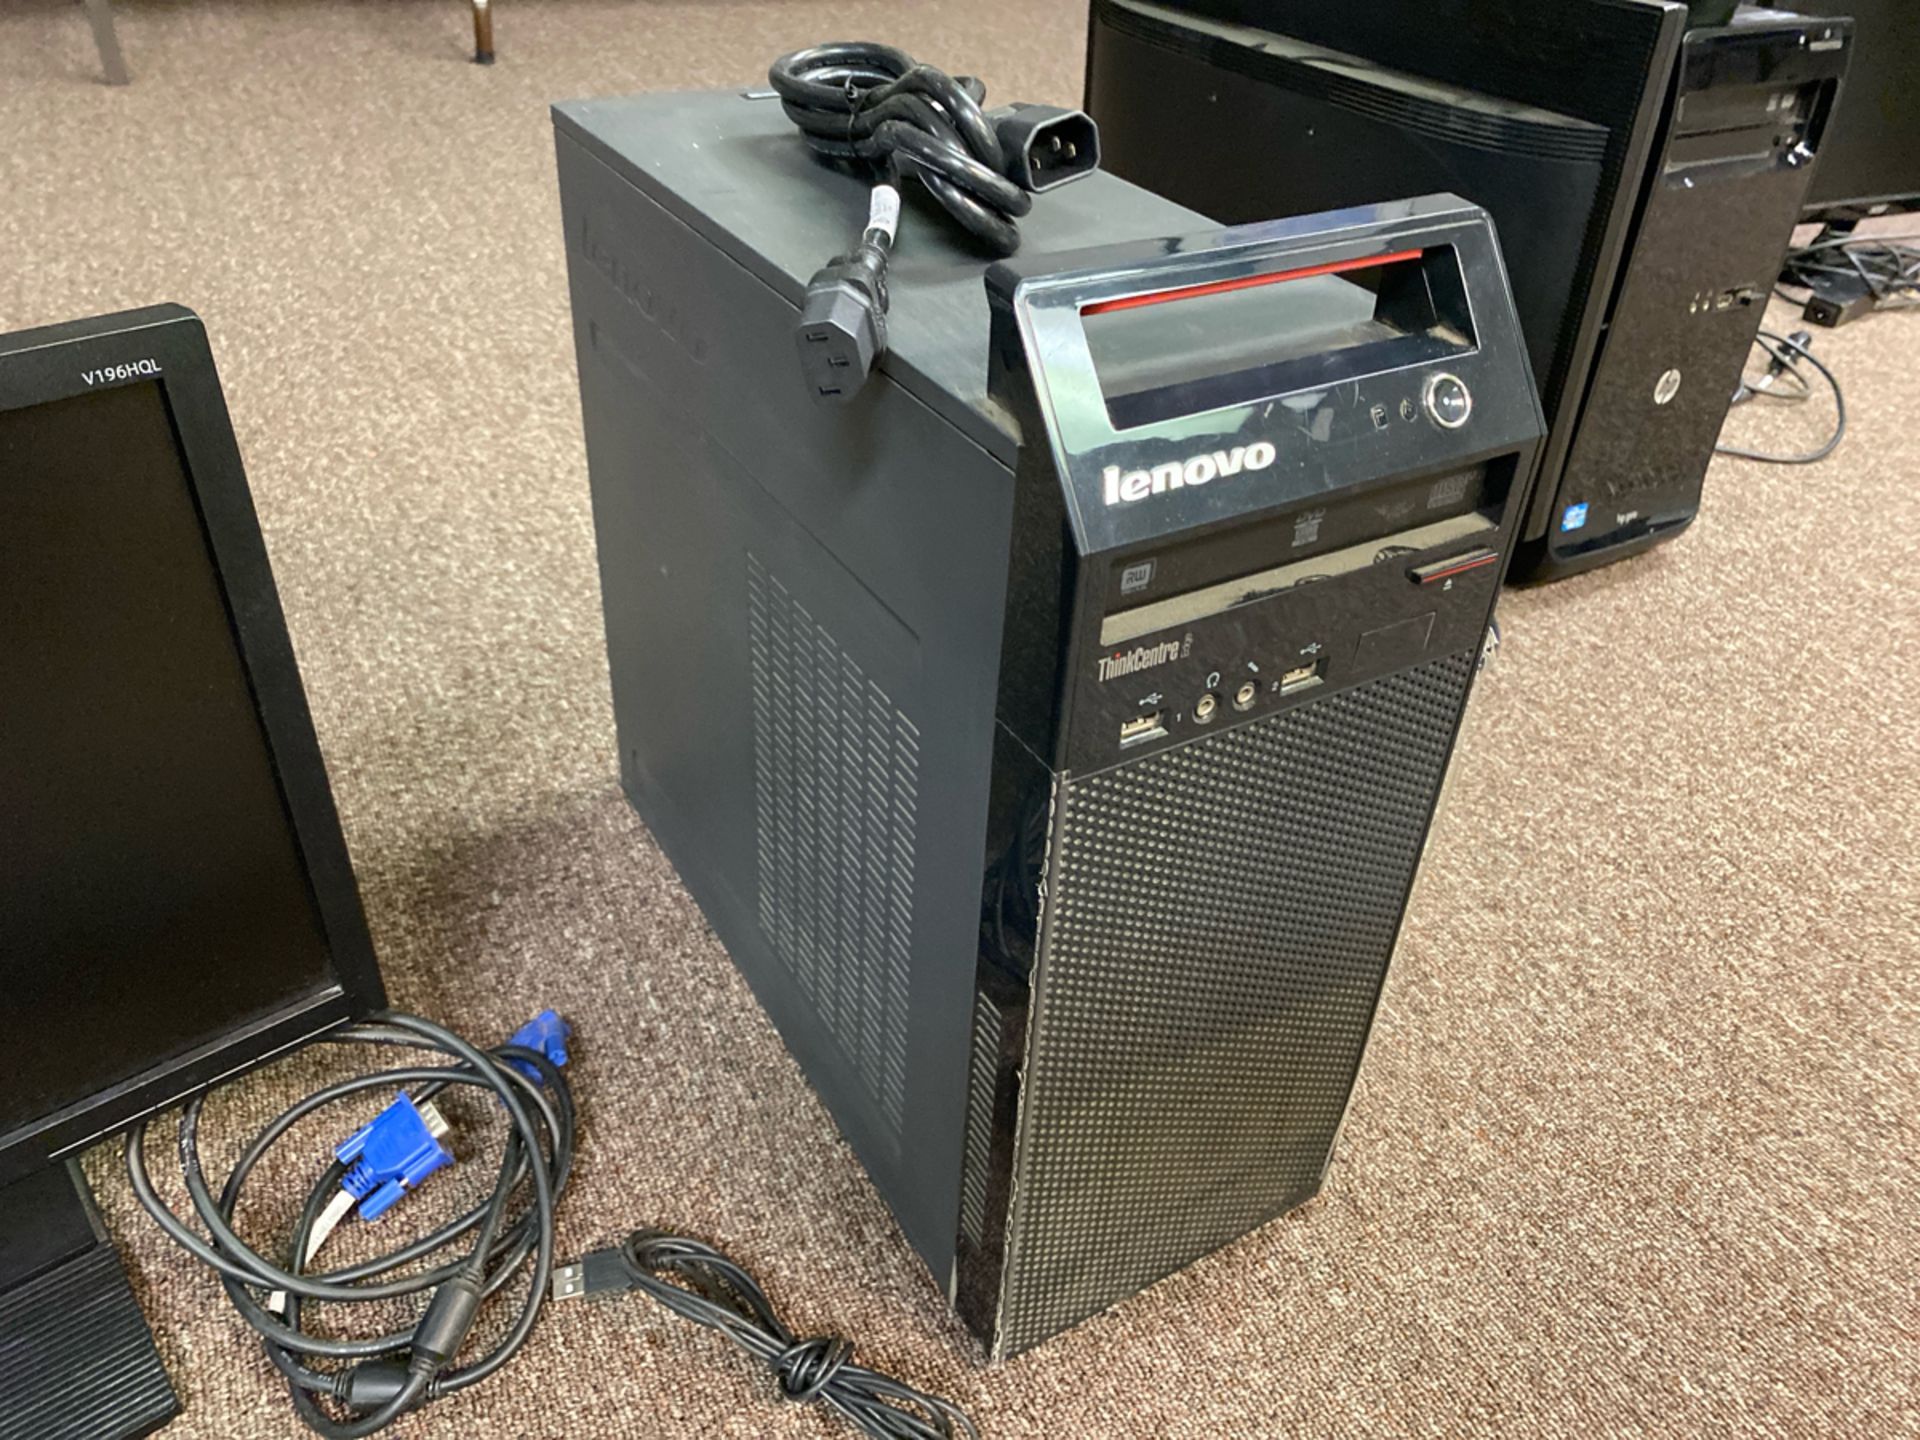 ThinkCentre i3 Computer - Image 2 of 4